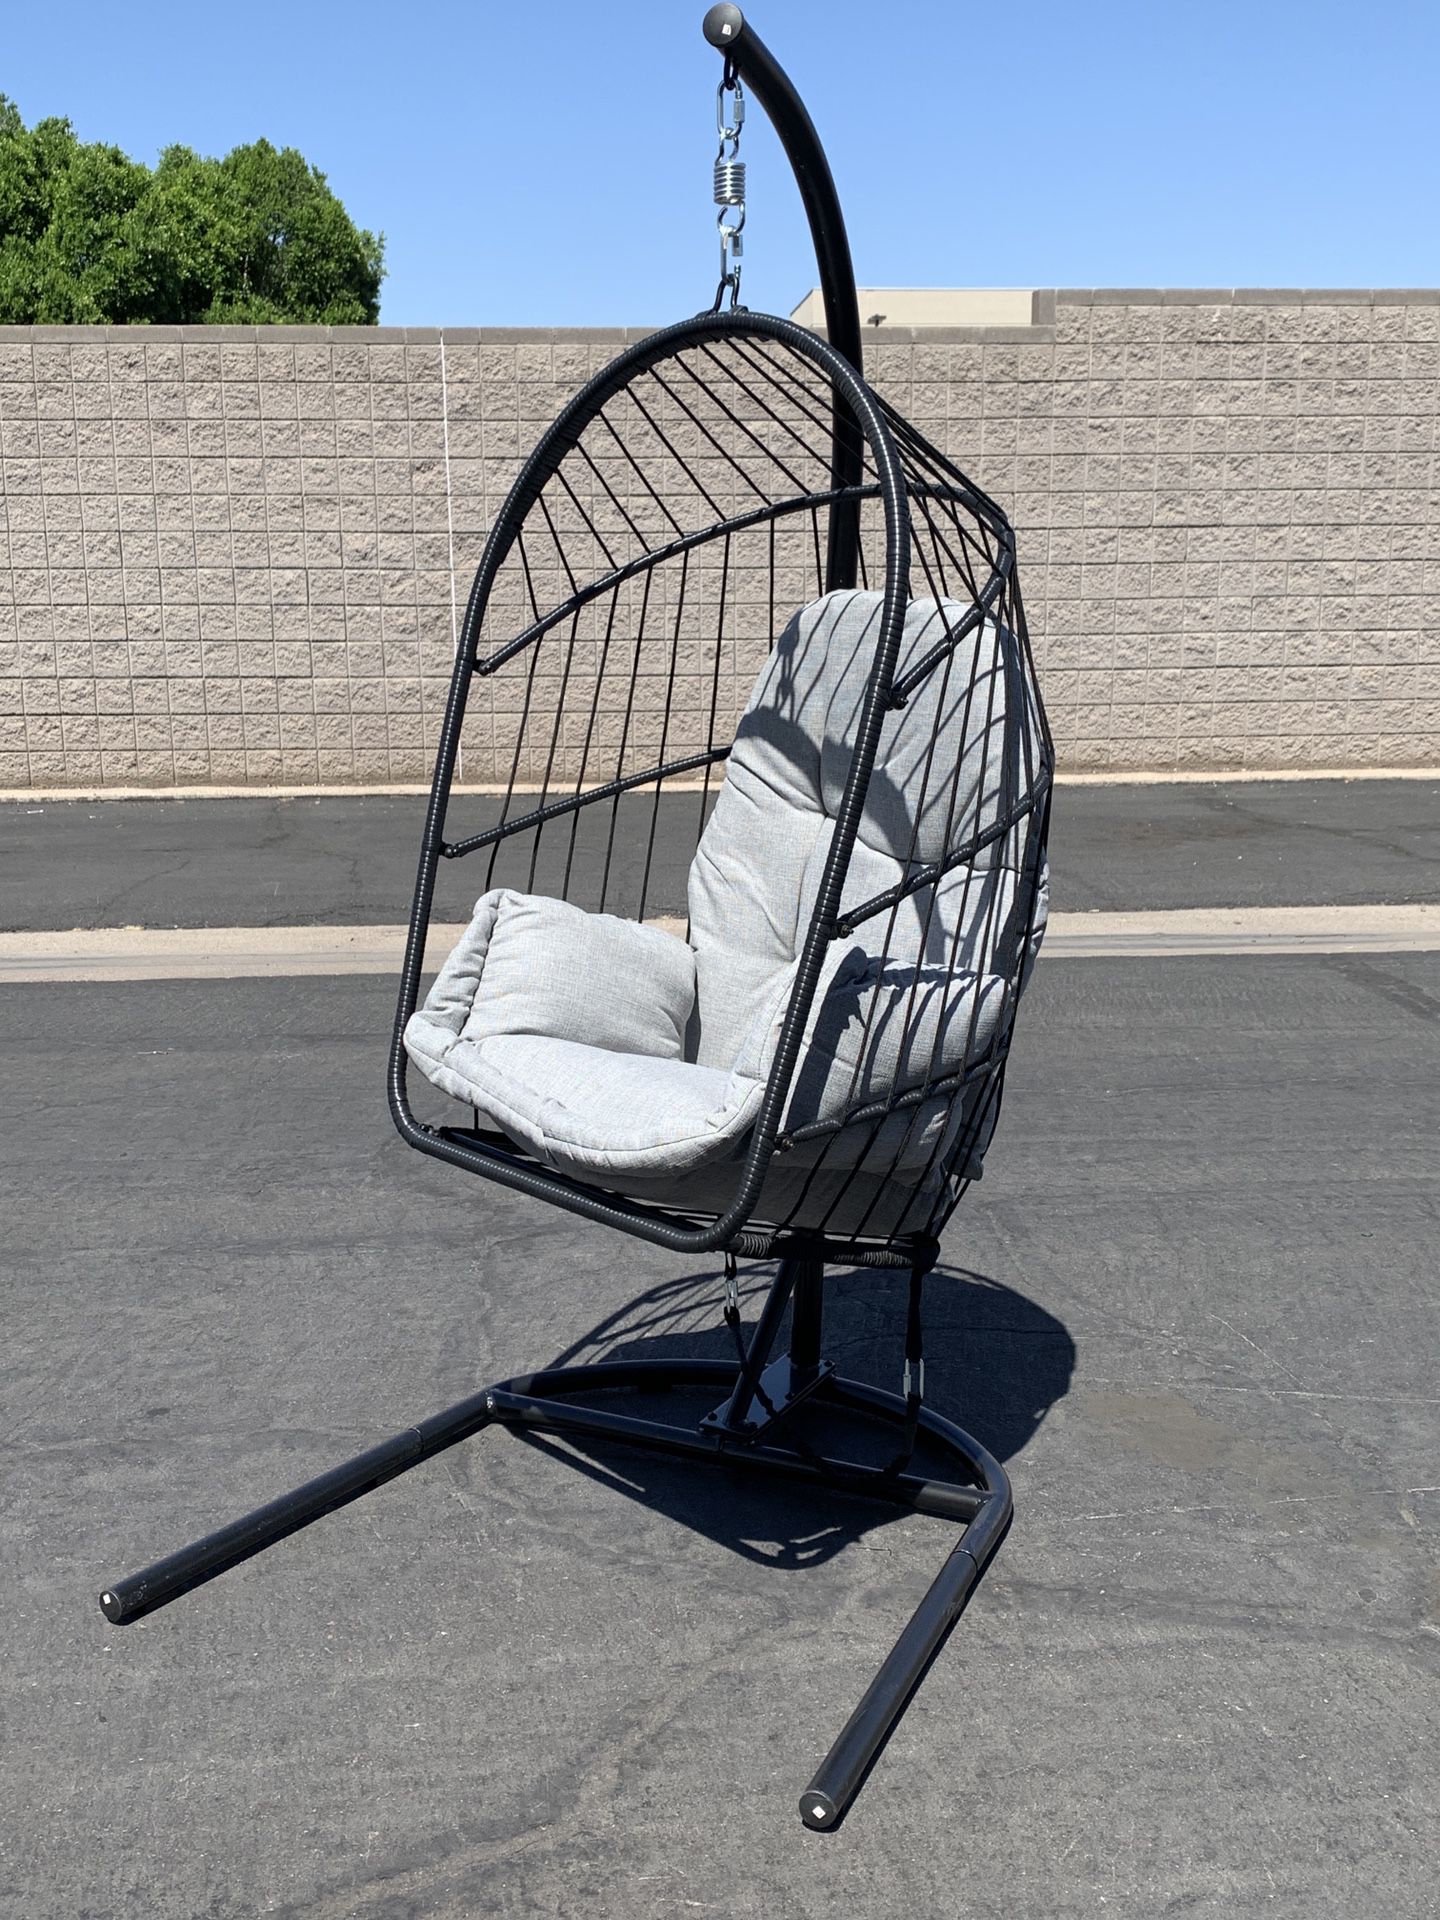 Hanging Hammock Egg Chair Patio Rattan Swing Chair with Stand and Grey Cushions